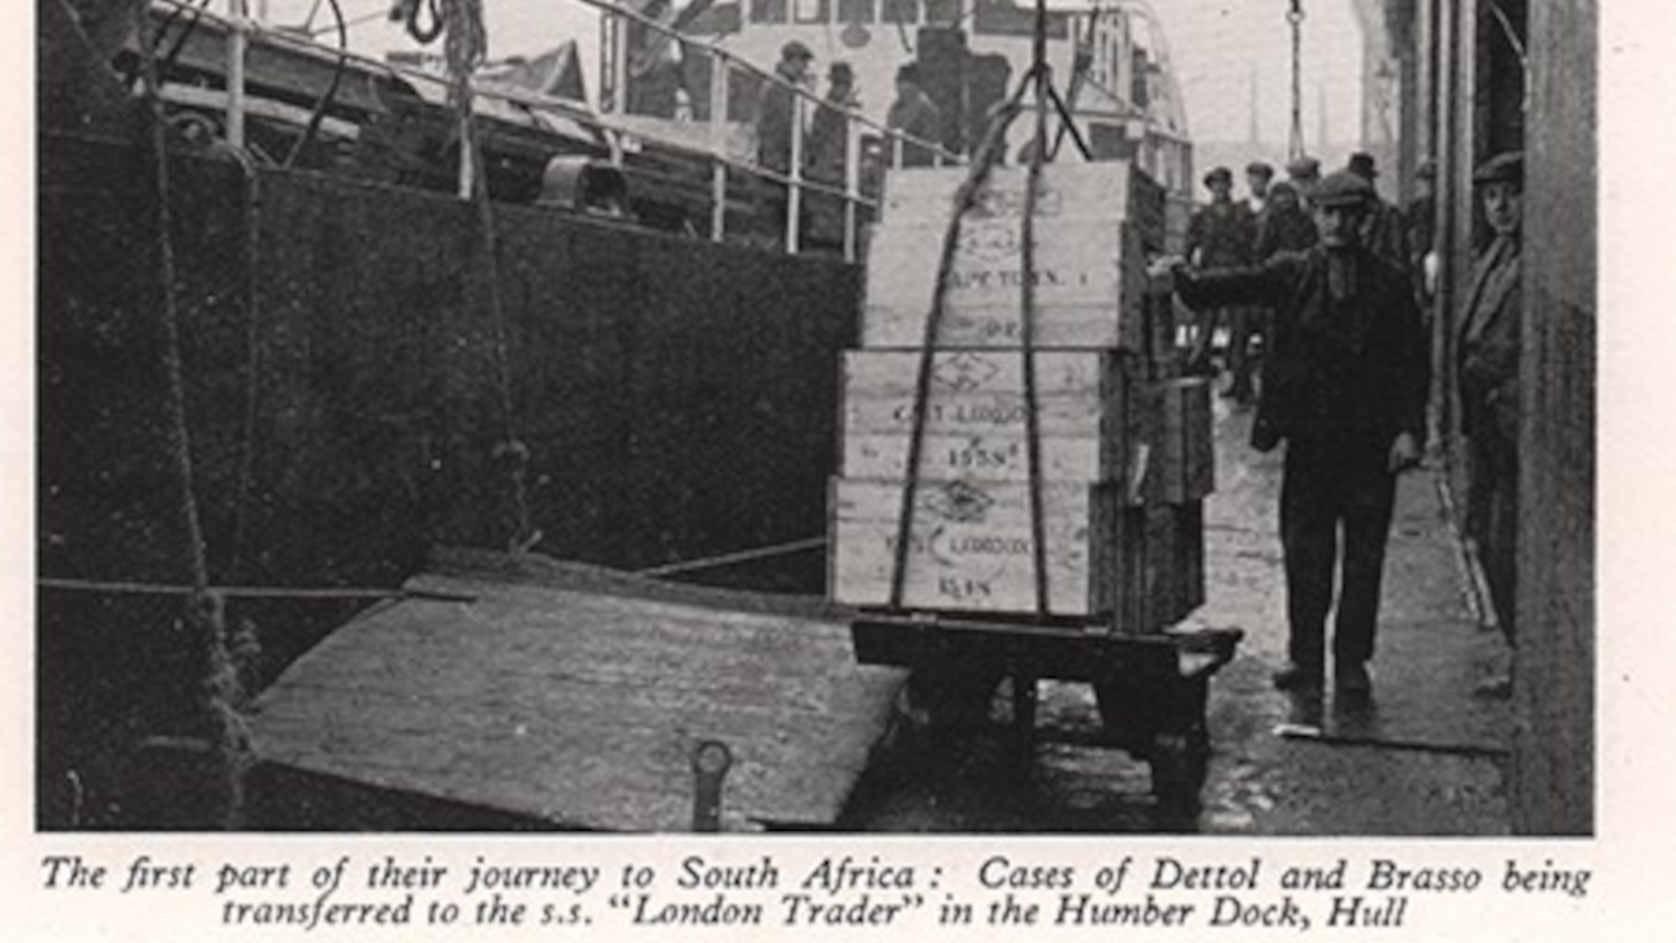 Cases of Dettol and Brasso being transferred to the s.s. "London Trader" in the Humber Dock, Hull